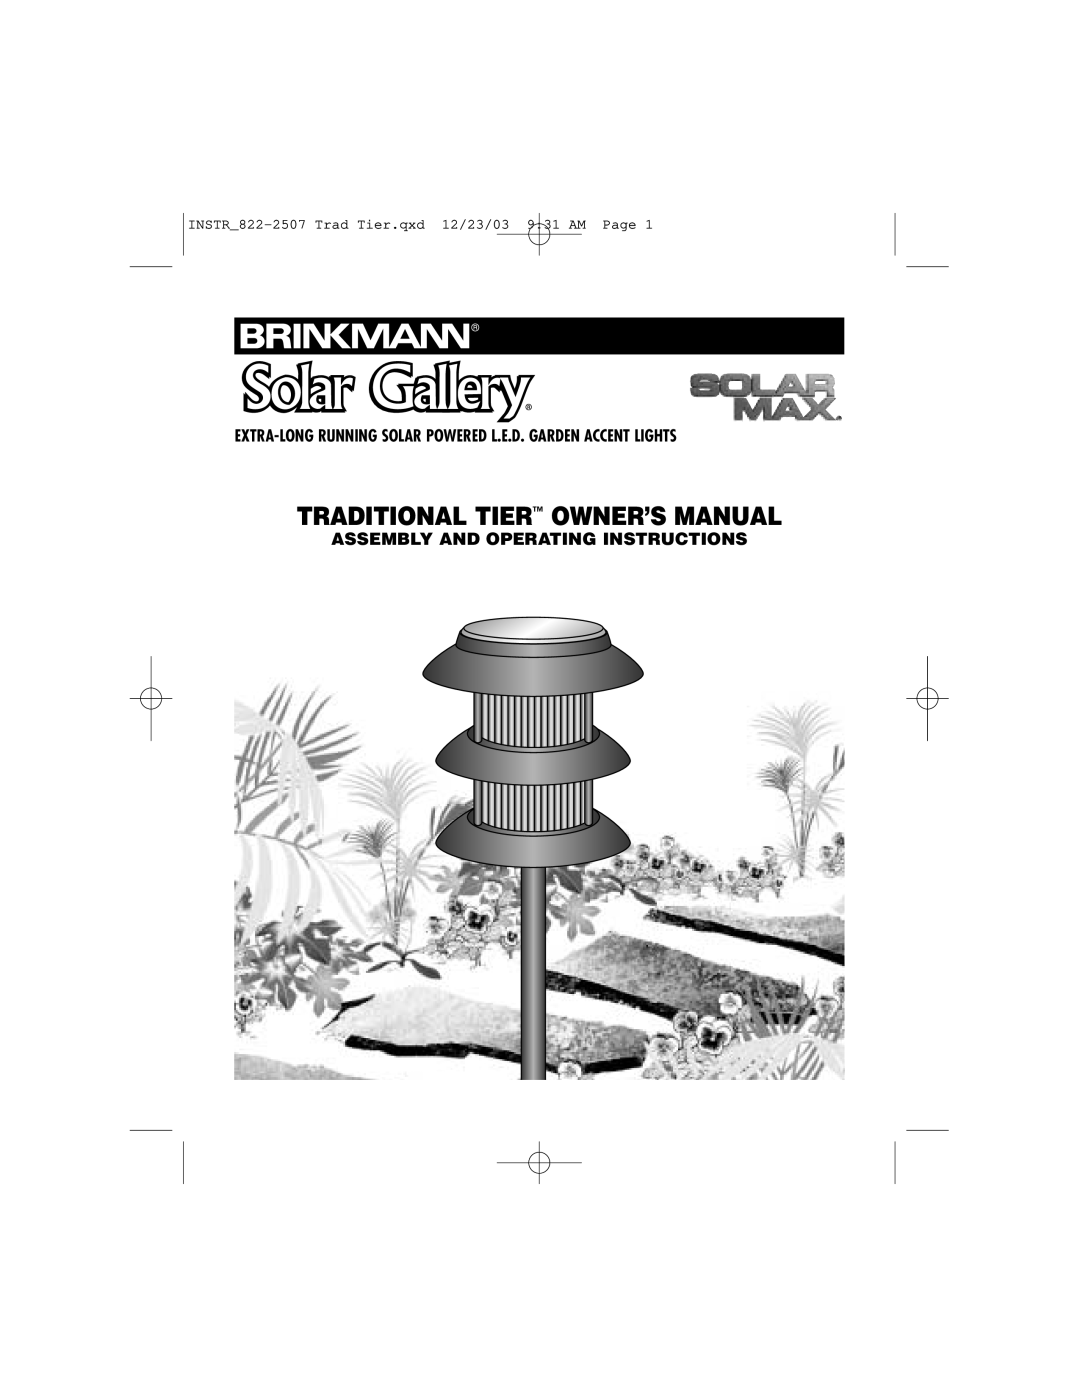 Brinkmann 822-2507-8 owner manual Assembly And Operating Instructions, INSTR 822-2507Trad Tier.qxd 12/23/03 9 31 AM Page 